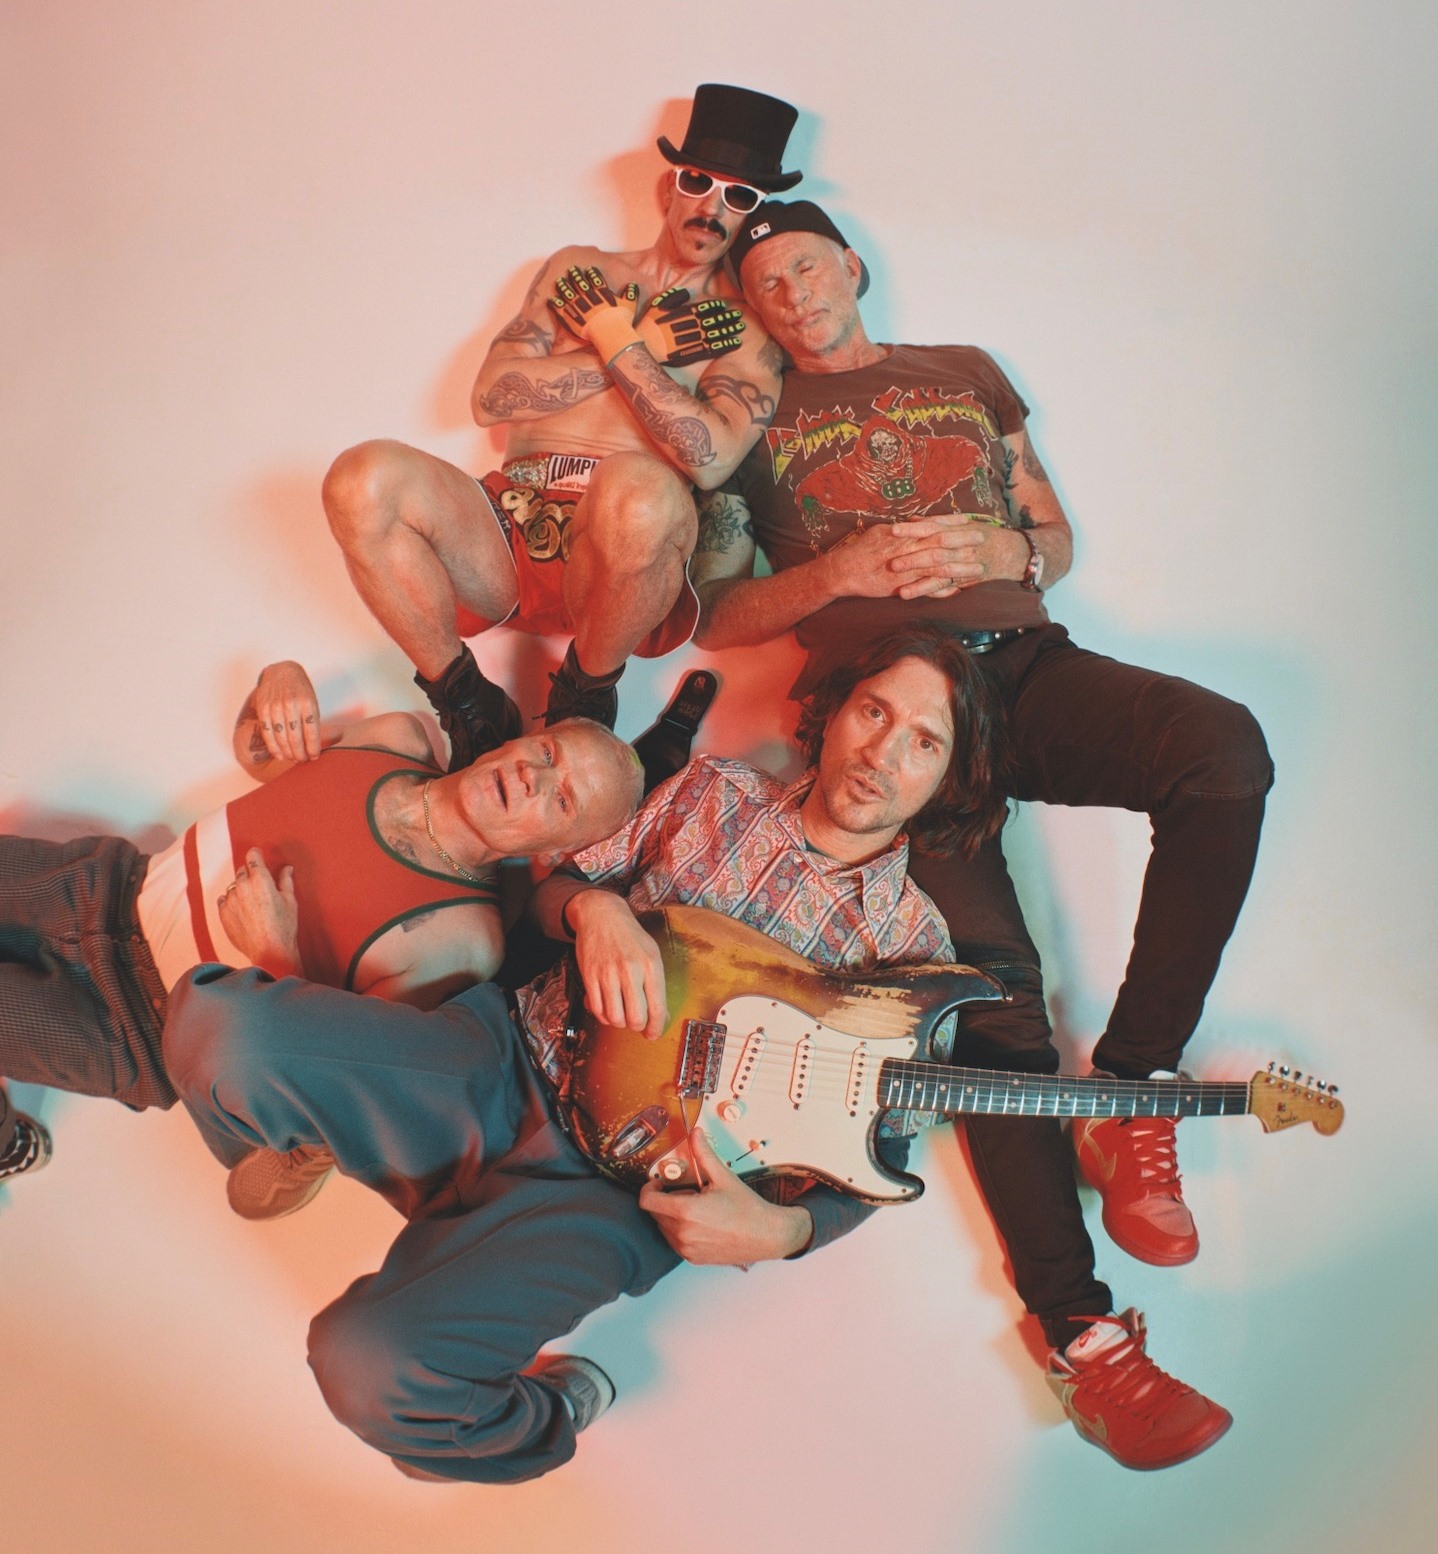 hennemusic: Red Hot Chili announce new tour dates Europe and North America